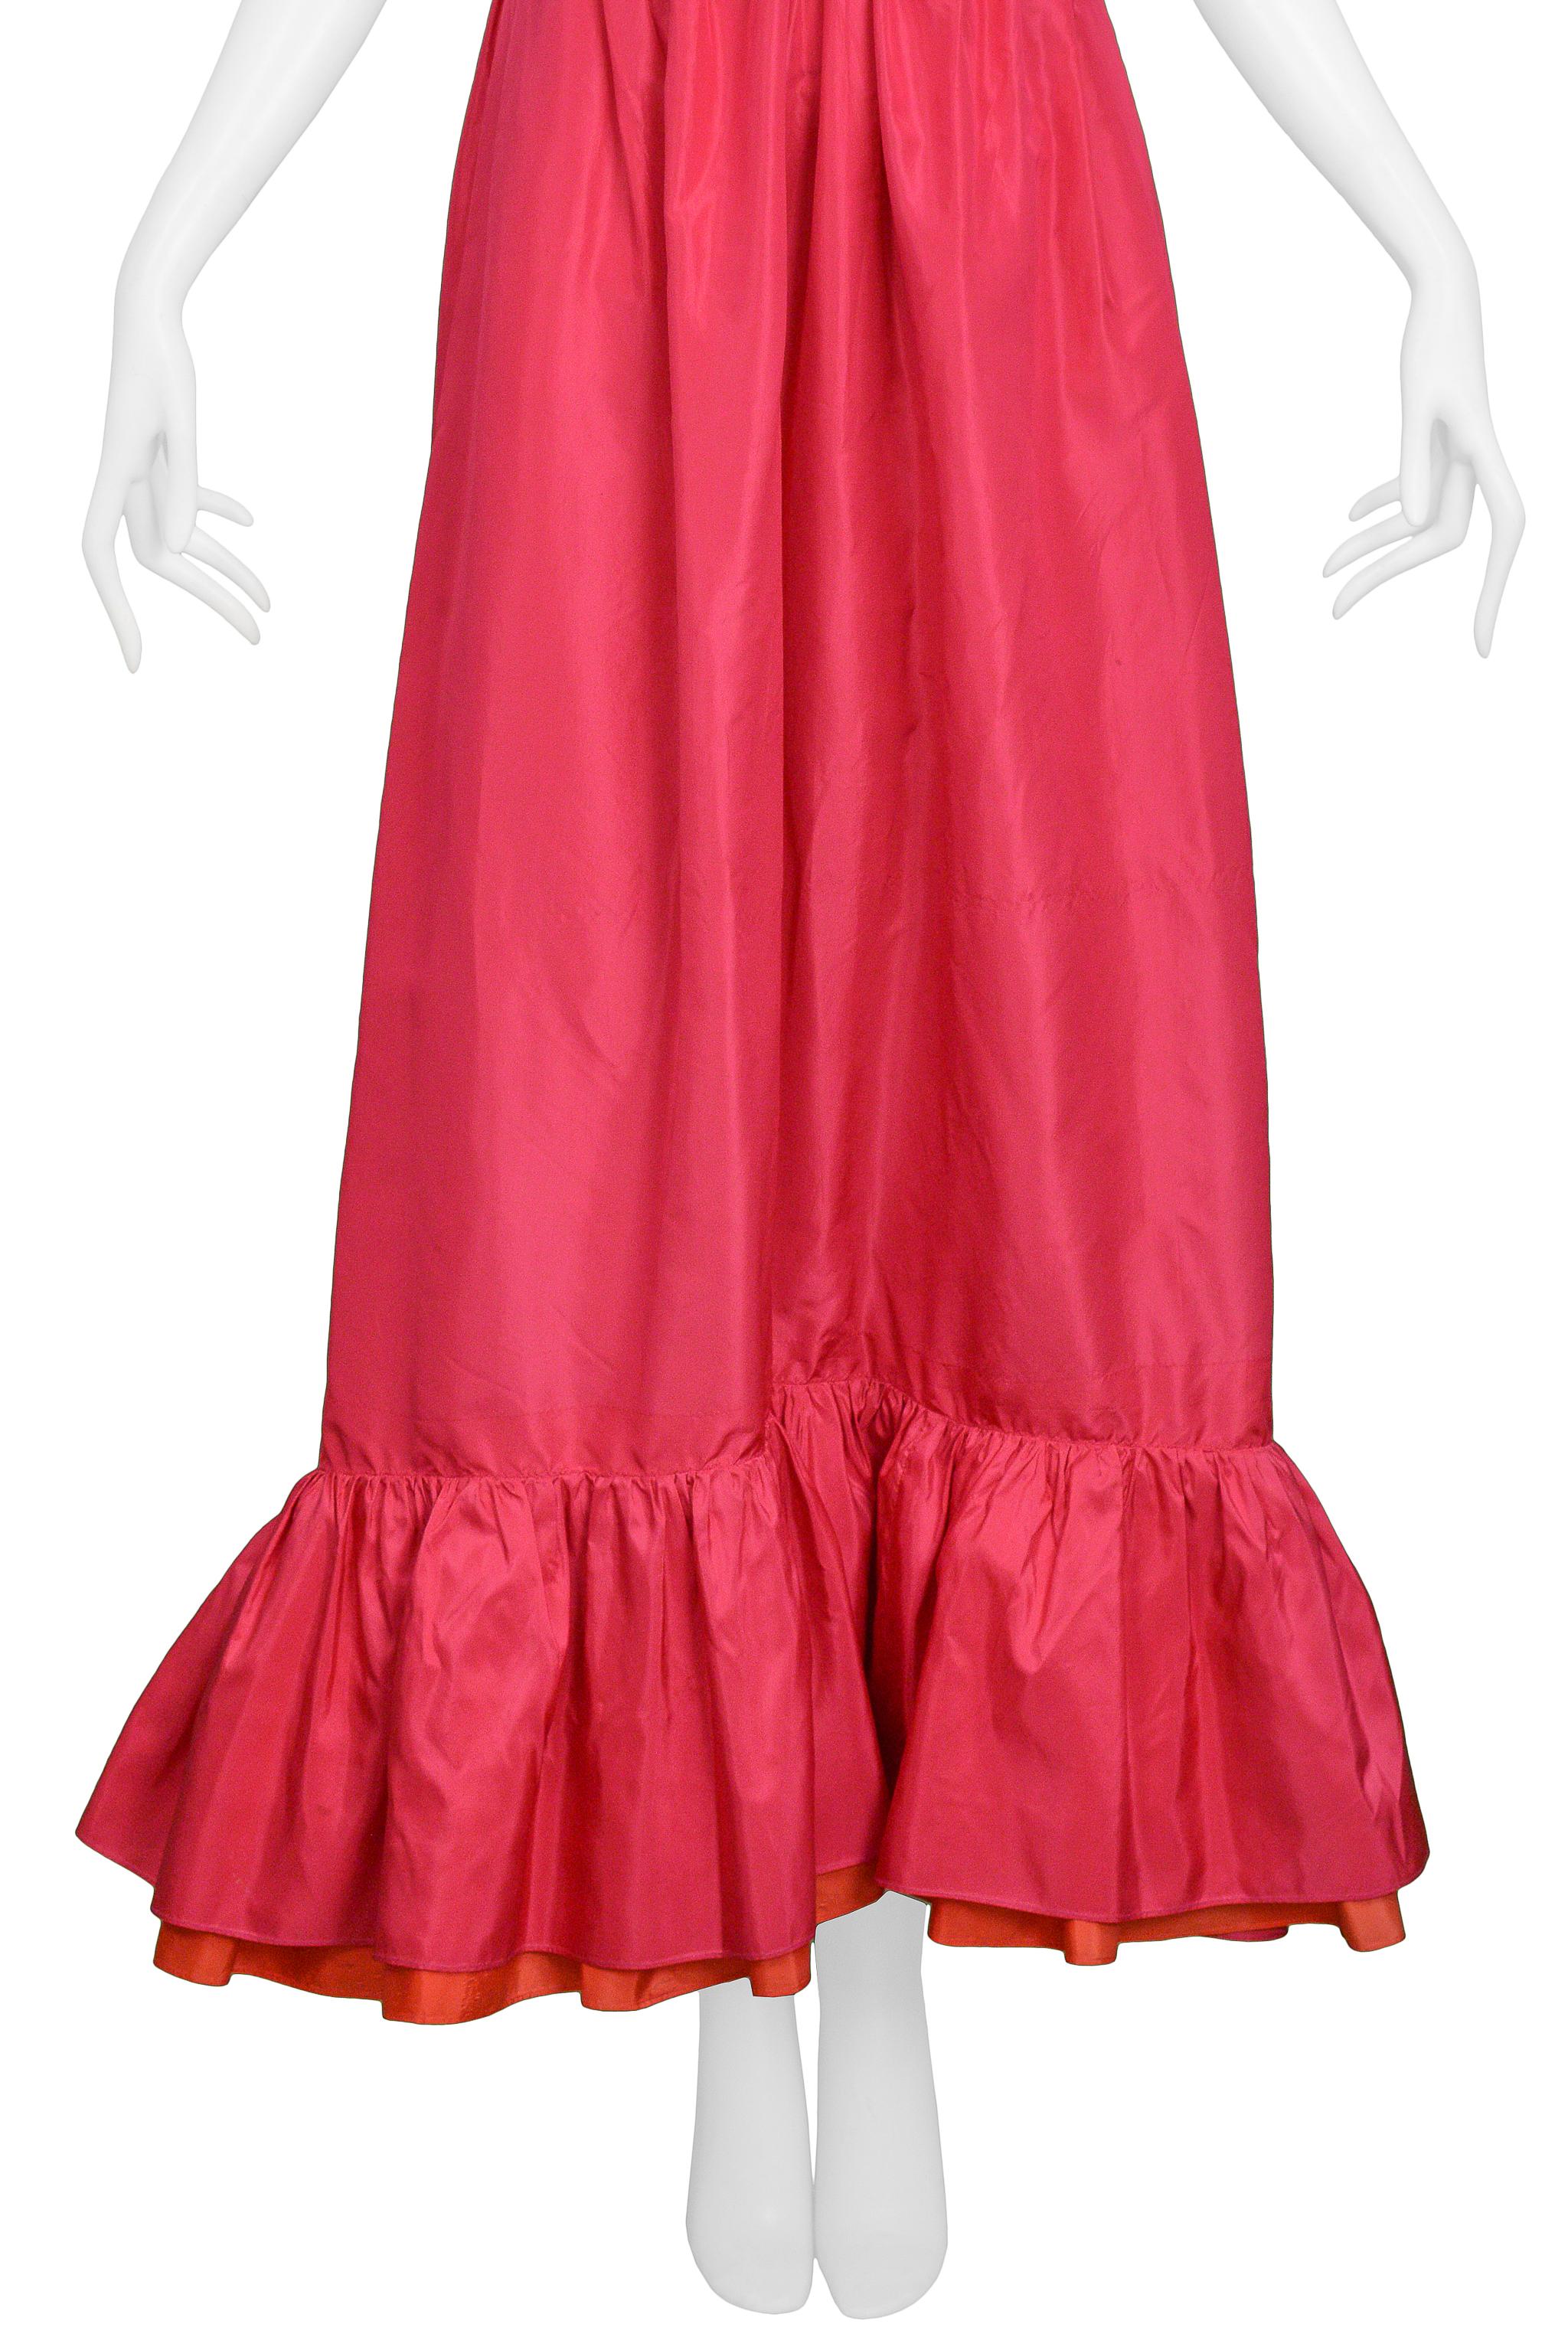 Yves Saint Laurent YSL Pink Taffeta Maxi Skirt With Ruffles In Good Condition For Sale In Los Angeles, CA